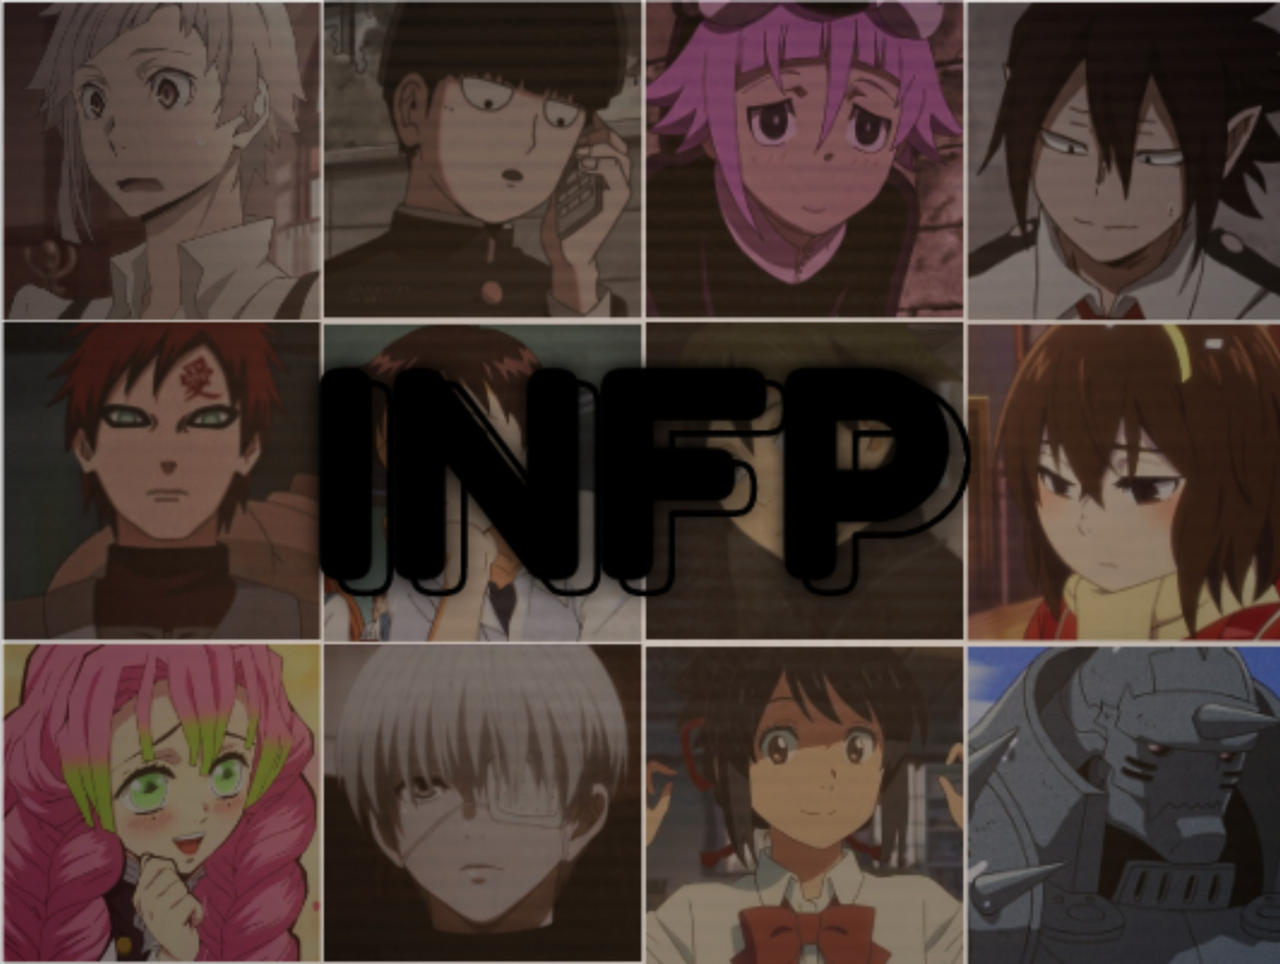 infp anime characters by ICatfishedYourGramma on DeviantArt